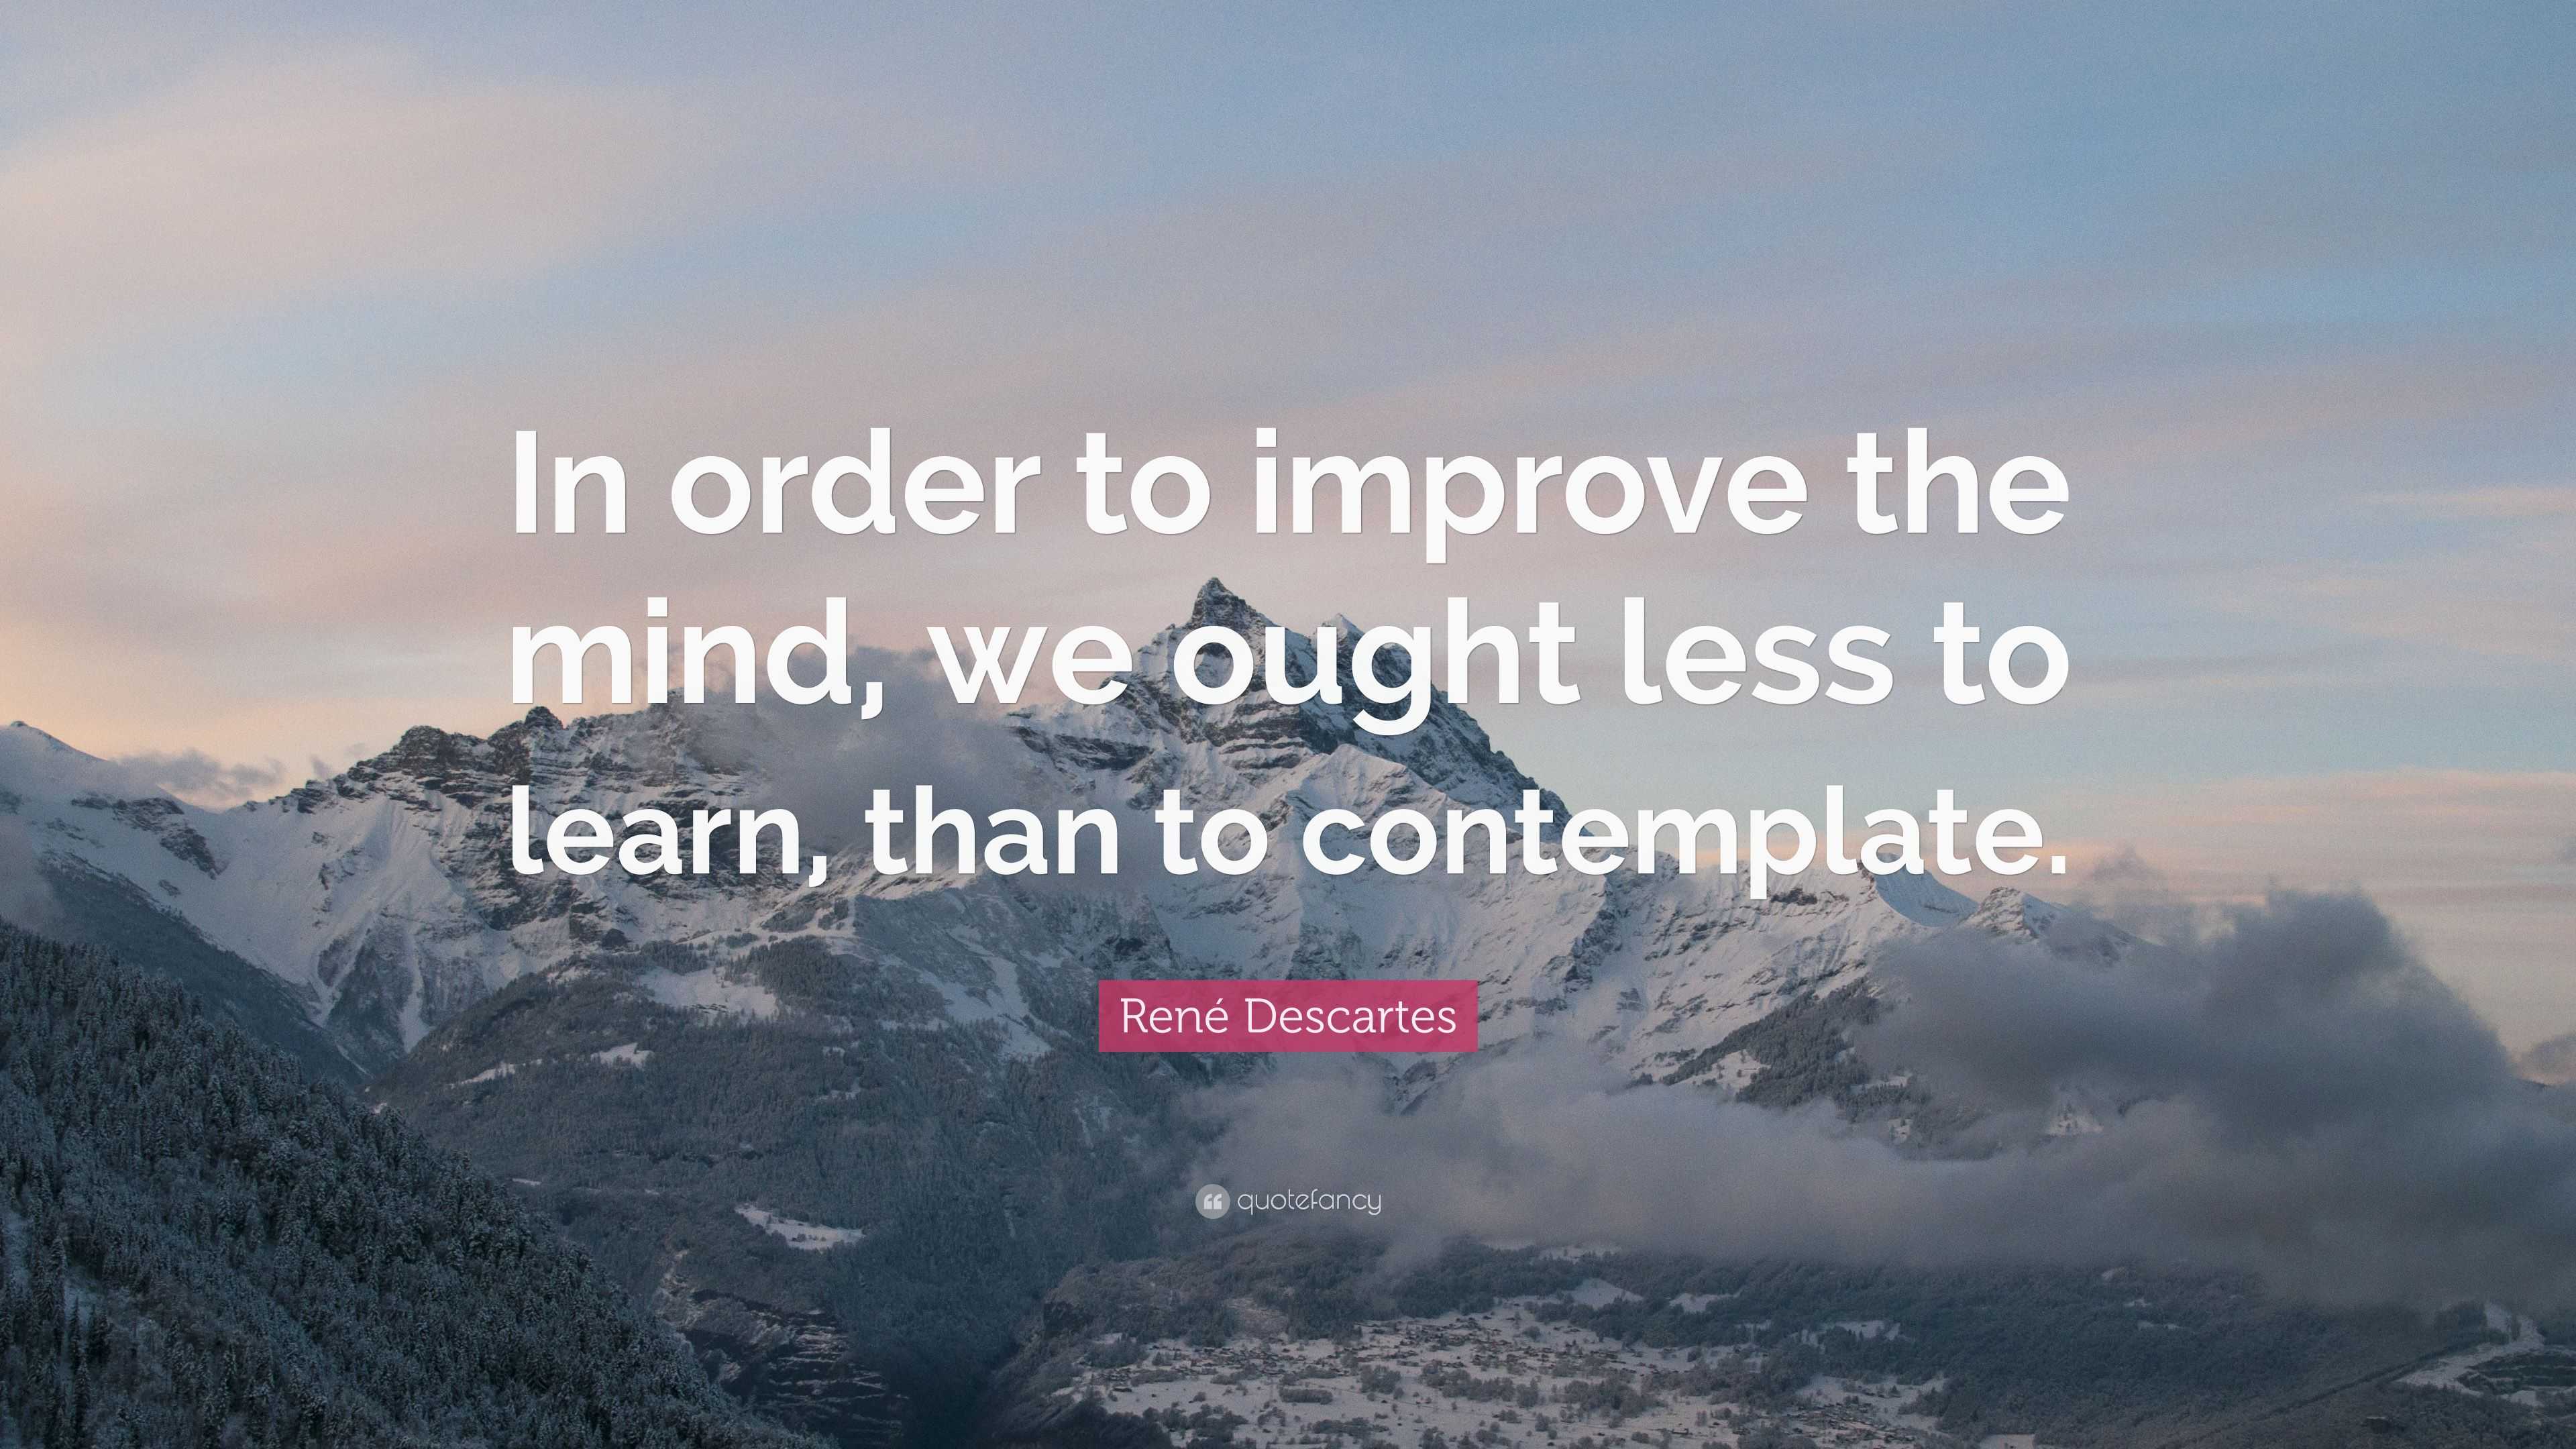 René Descartes Quote: “In order to improve the mind, we ought less to ...